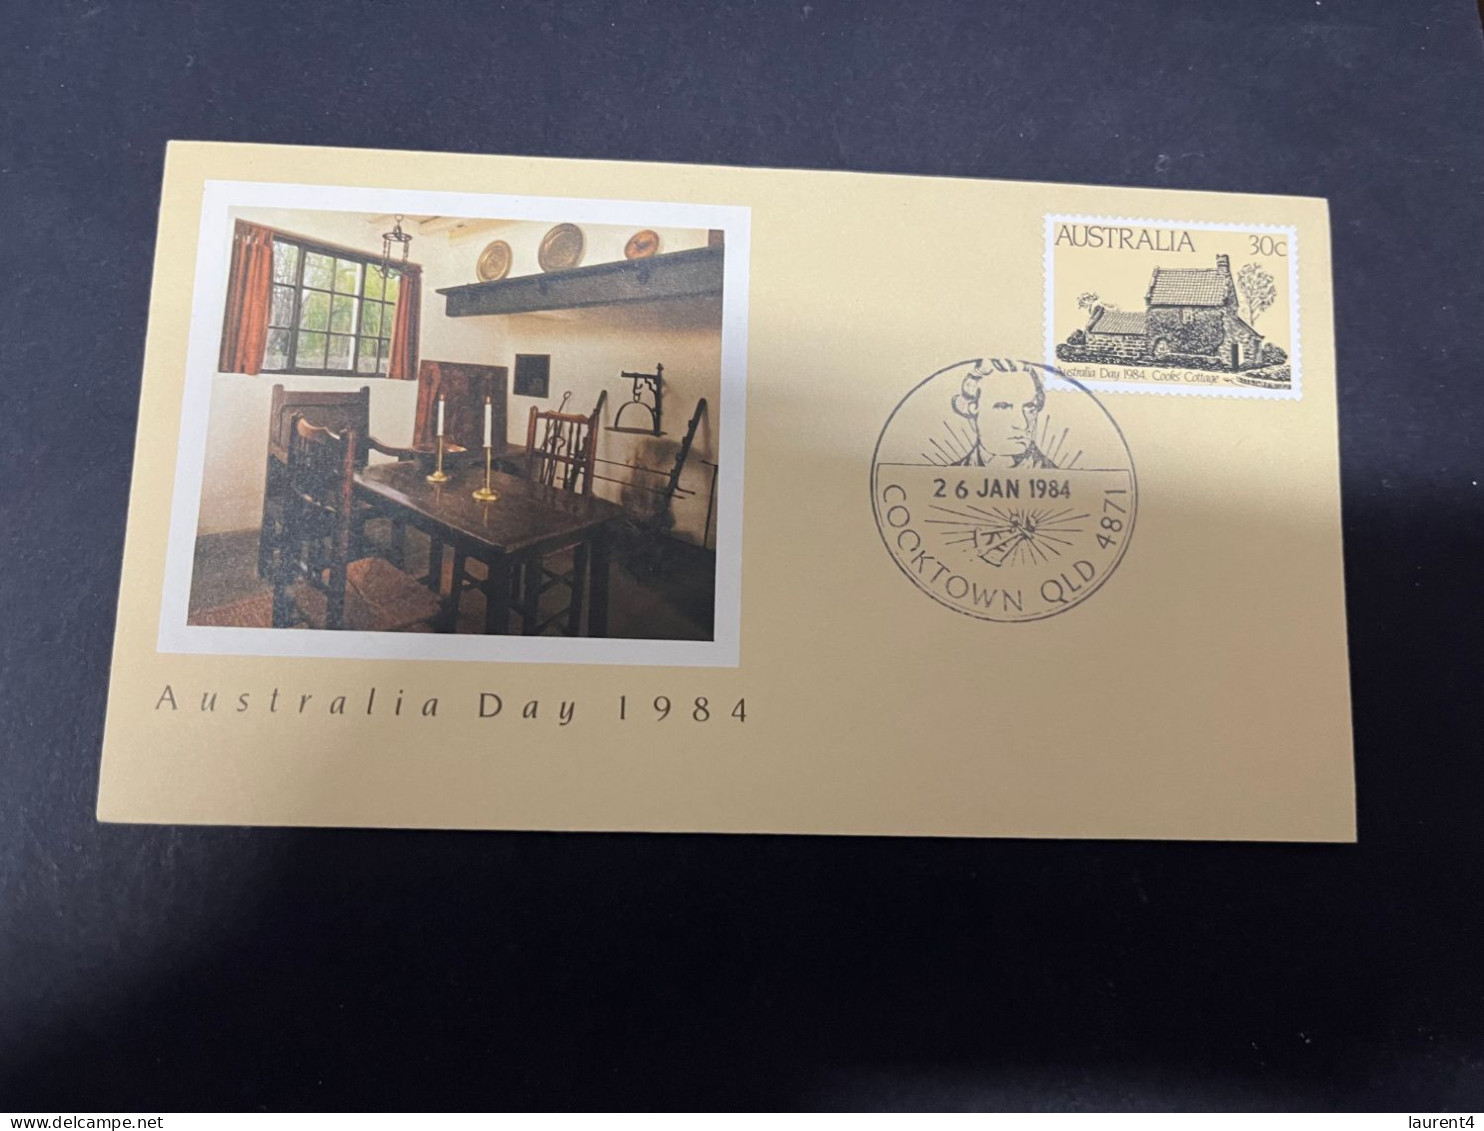 26-3-2024 (4 Y 9) Australia (2 With With Different Postmark) FDC - Australia Day 1984 - FDC